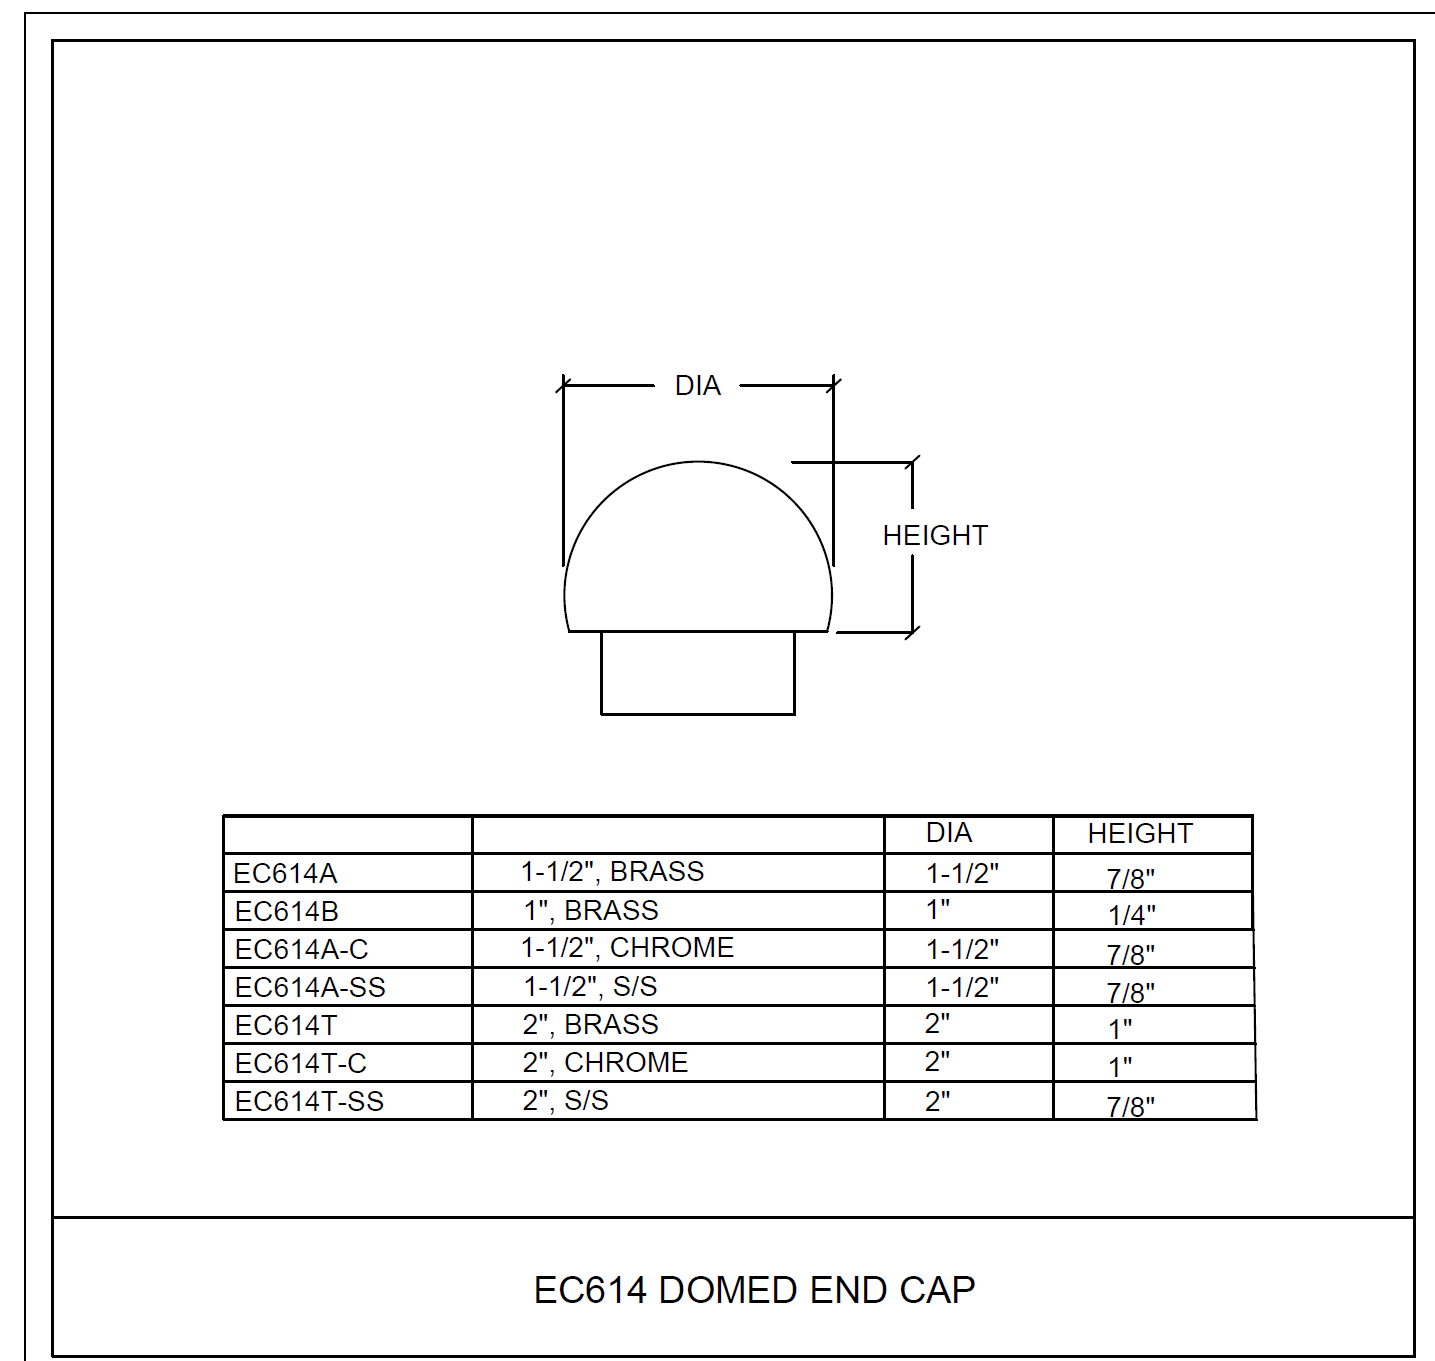 Domed End Cap 2.0" - All finishes